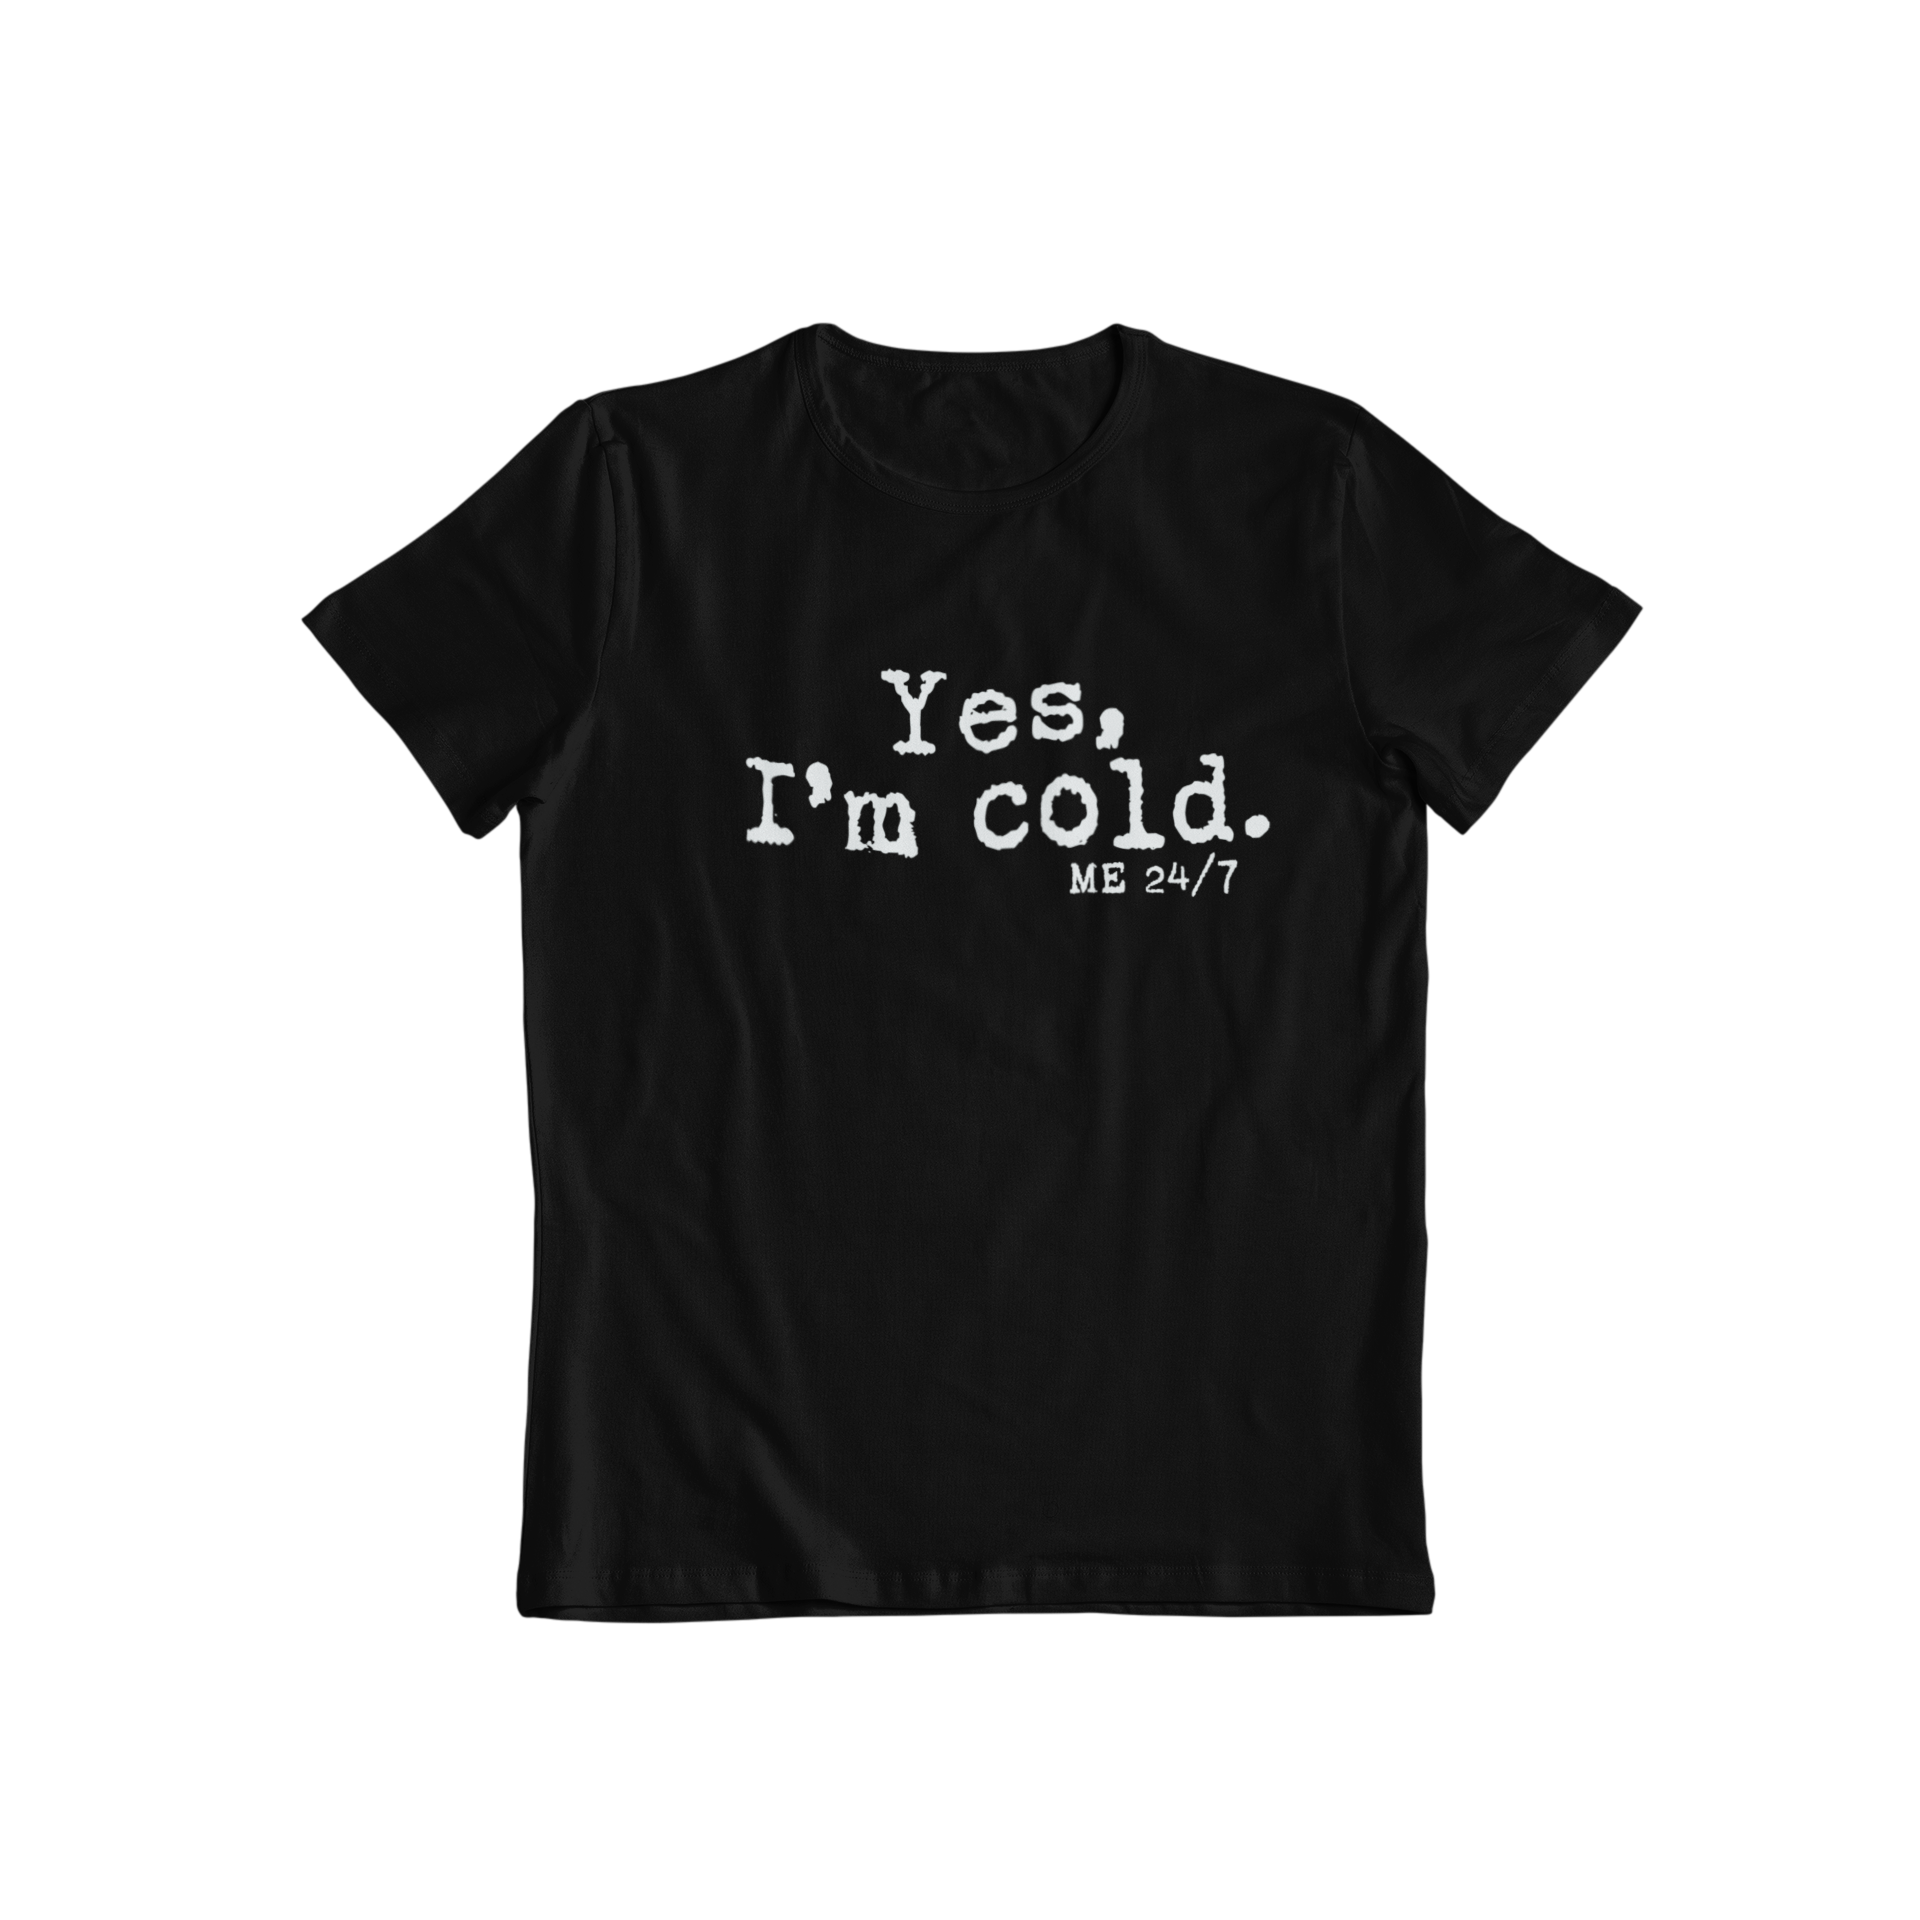 Stay cool and cozy with the Yes I'm Cold T-shirt! This classic slogan t-shirt is the perfect addition to any wardrobe, providing both style and comfort 24/7. Embrace the cold with a playful and quirky attitude.